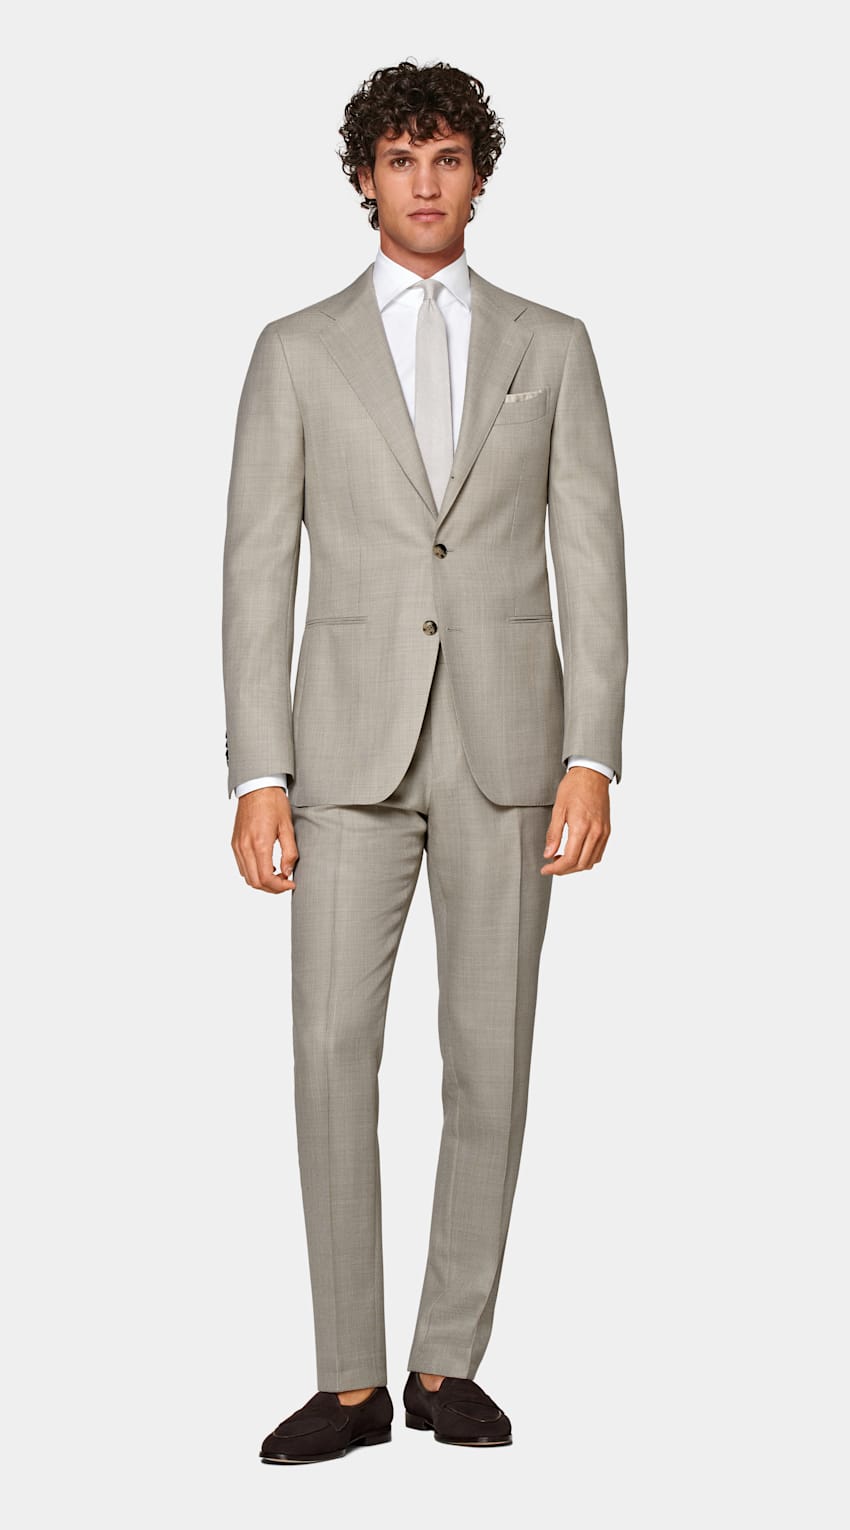 SUITSUPPLY Pure Wool by Vitale Barberis Canonico, Italy Sand Havana Suit